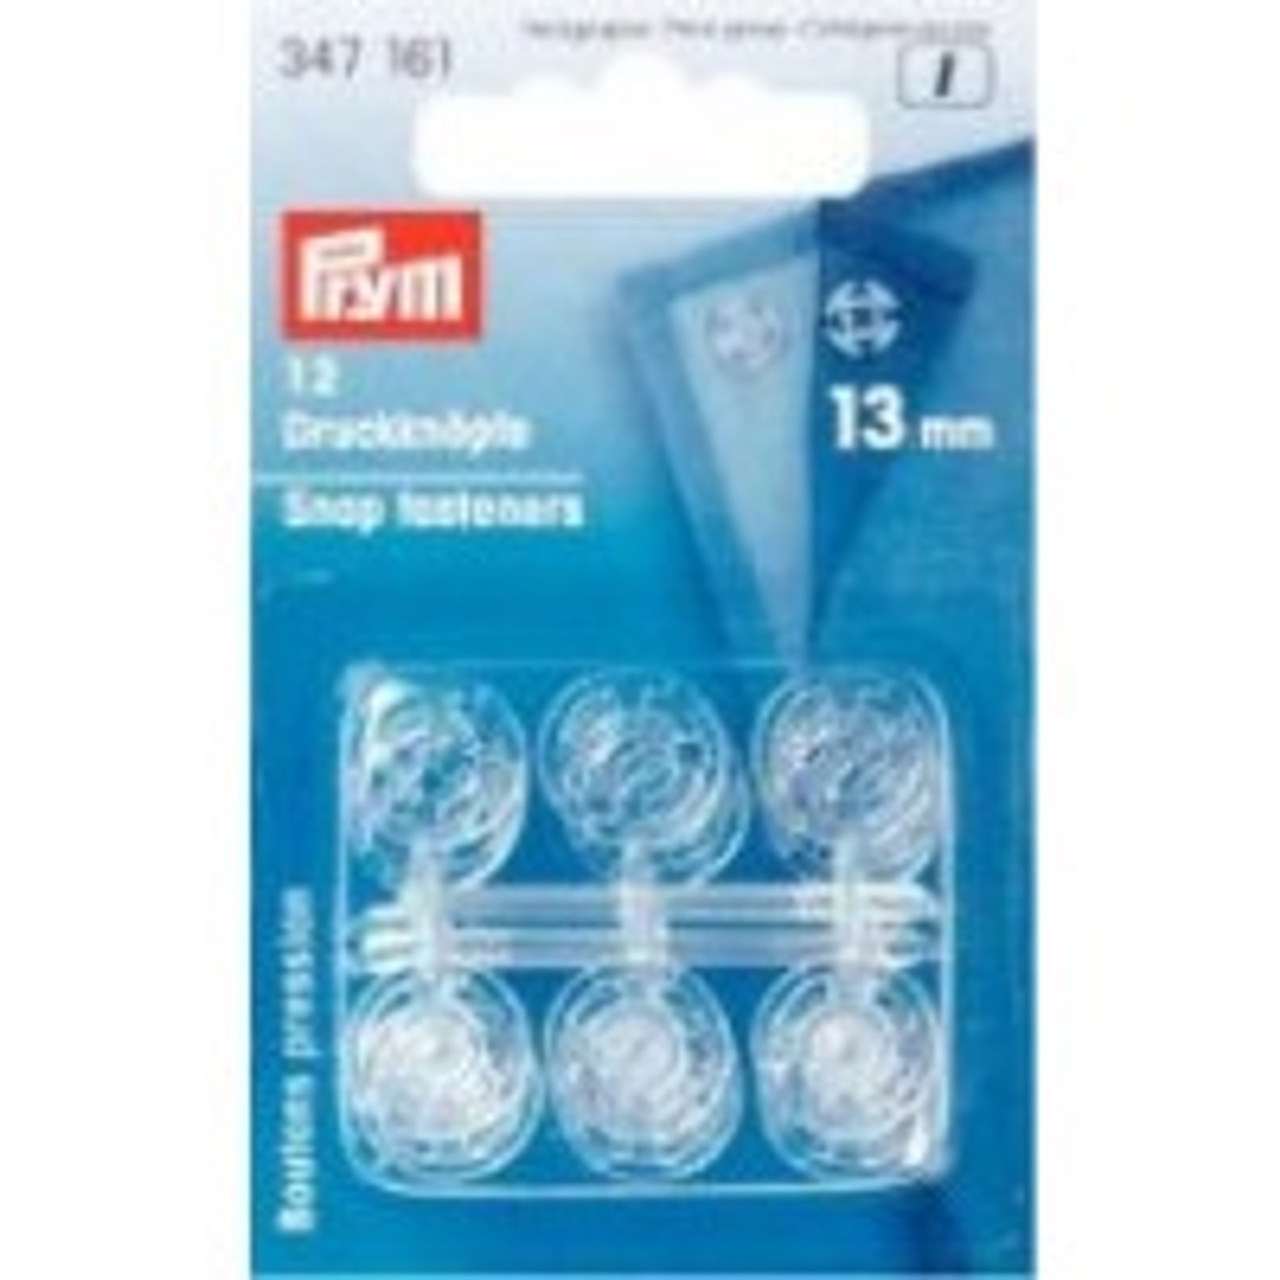 Large Acrylic Snap Fasteners, 13mm diameter (12 sets)